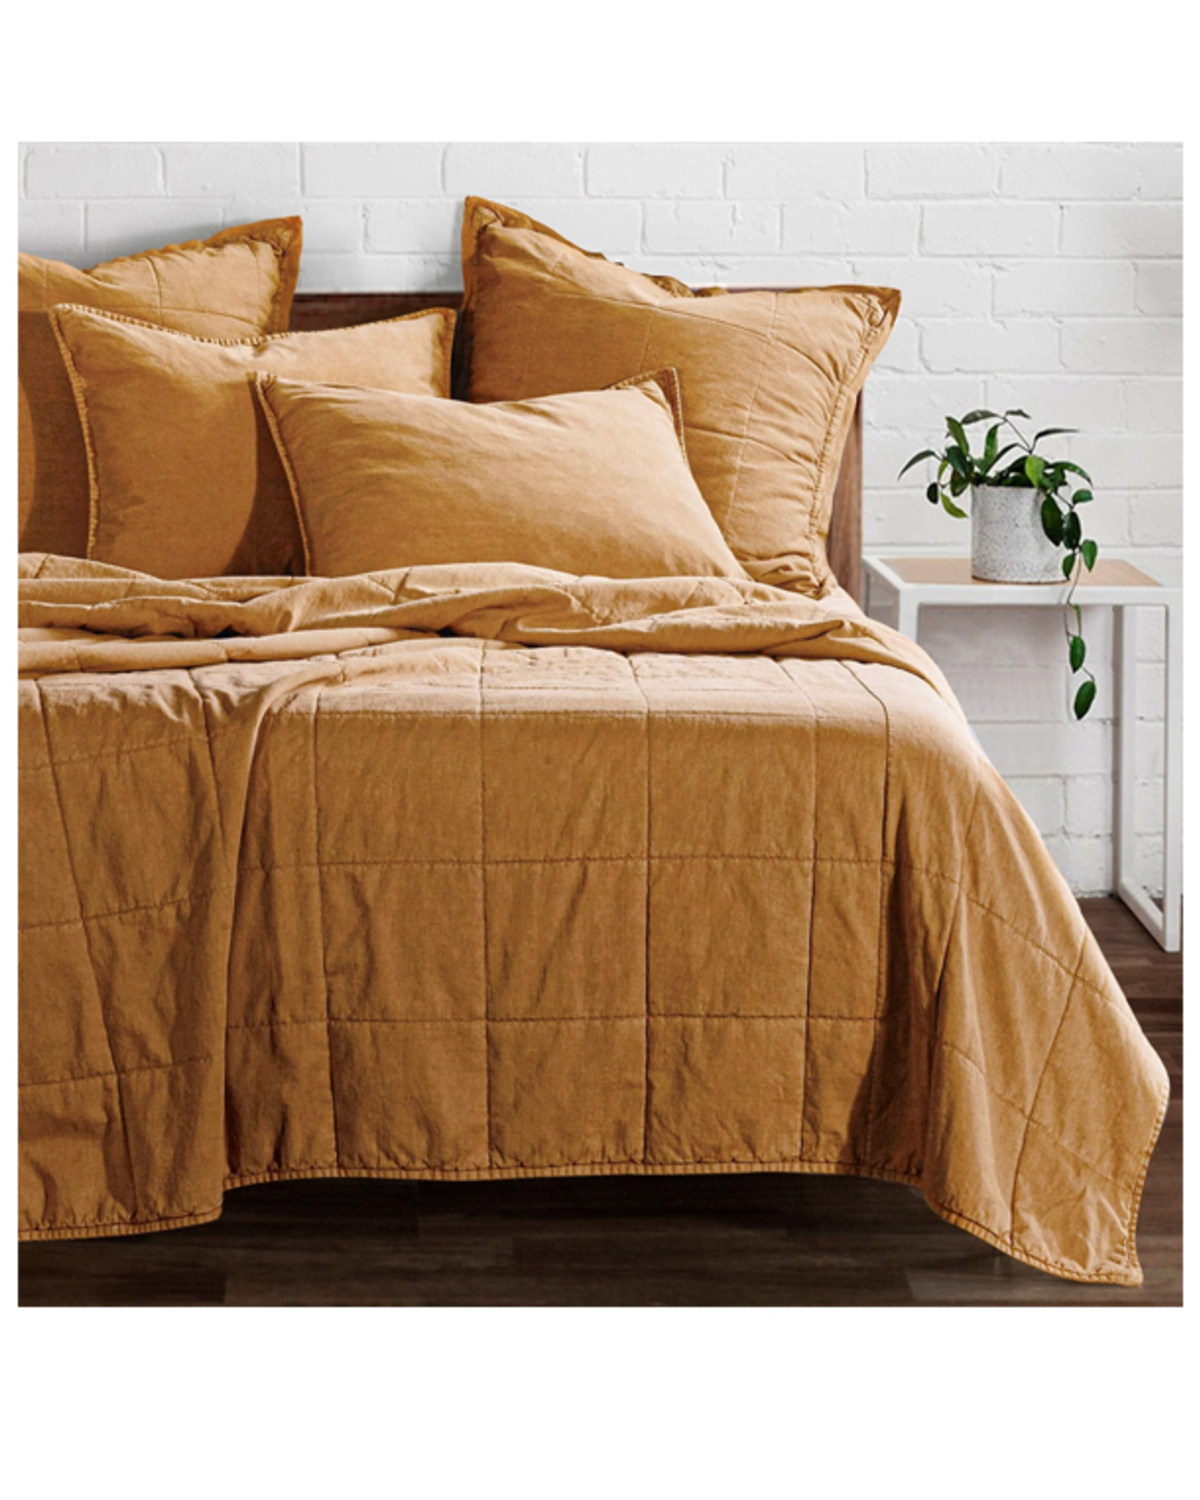 HiEnd Accents Terracotta Stonewashed Cotton Canvas King Coverlet Set